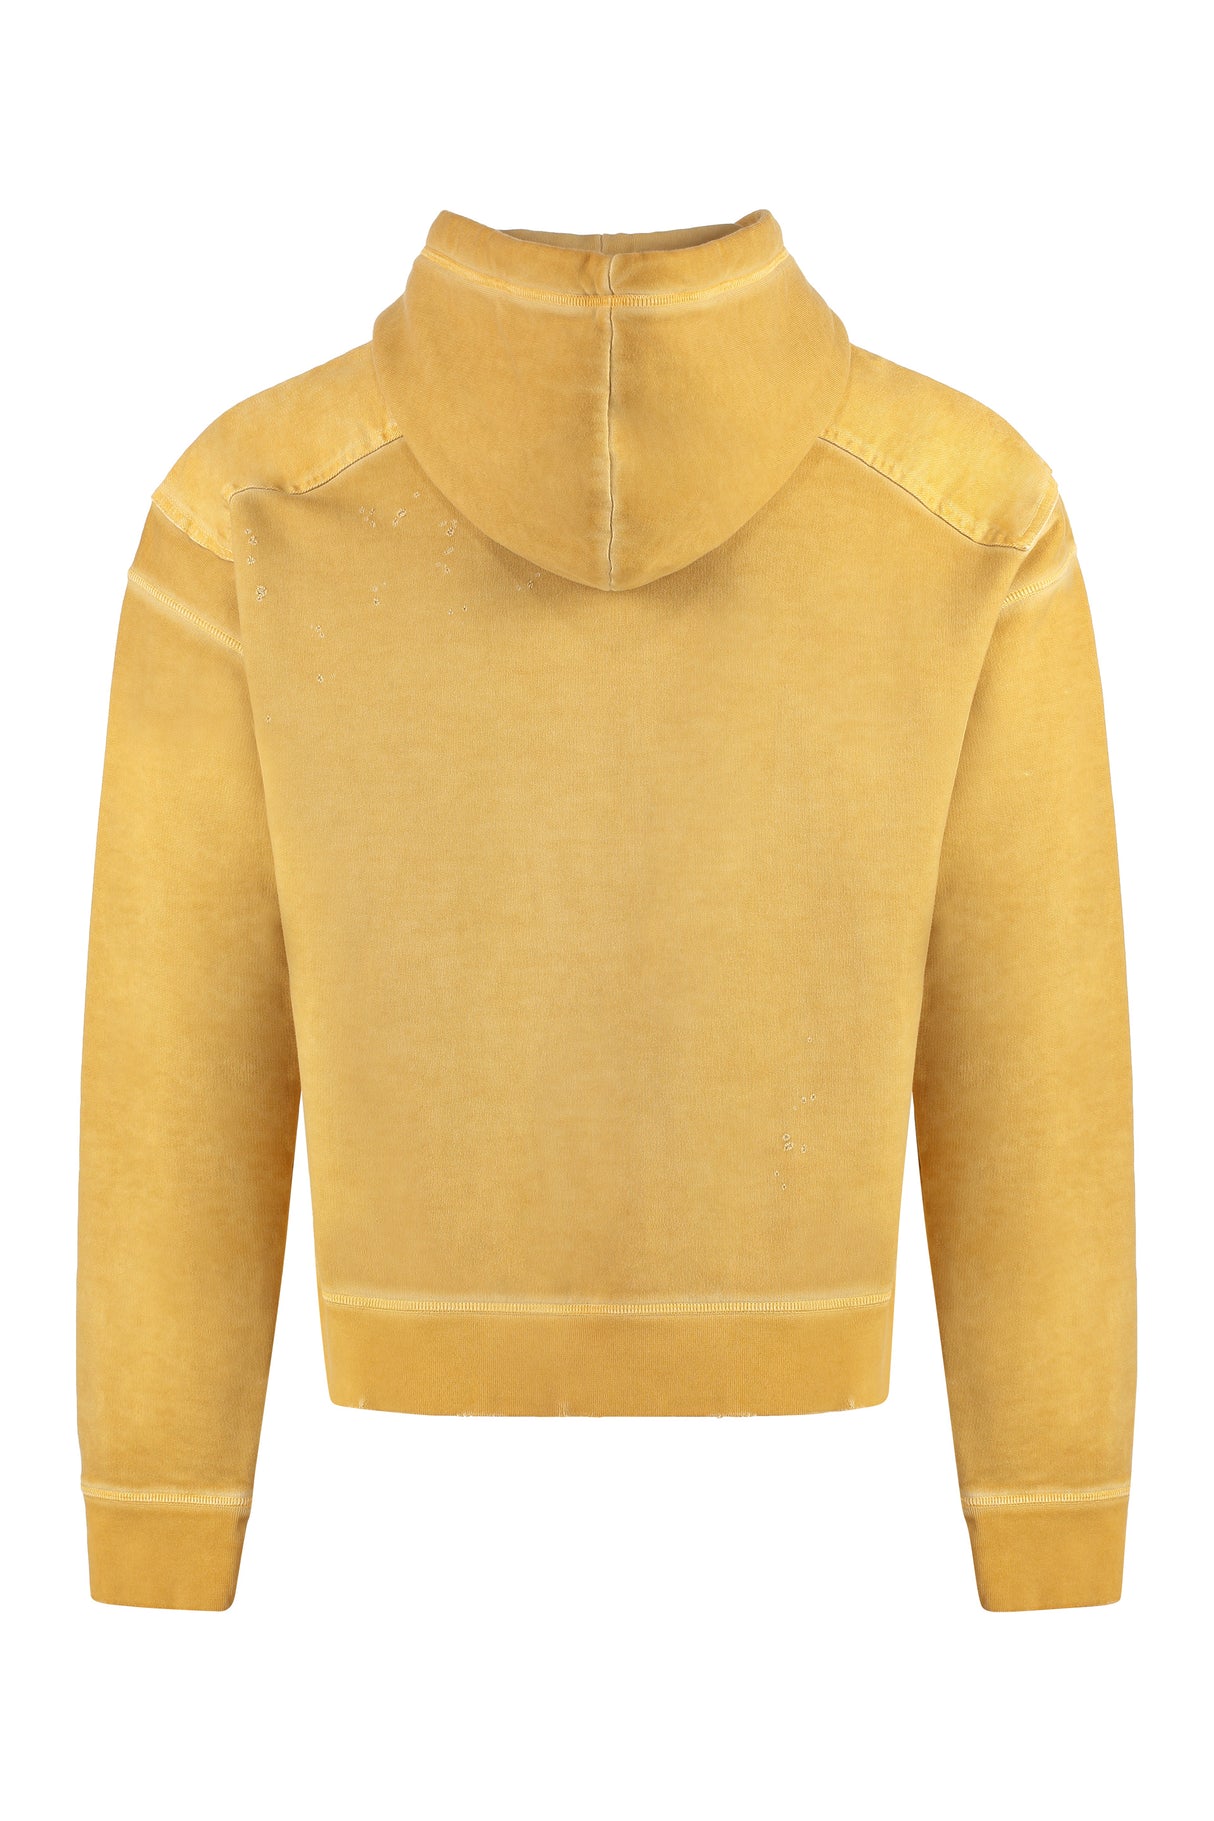 DSQUARED2 Men's Yellow Hoodie - Destroyed Effect + Ribbed Cuffs & Lower Edge